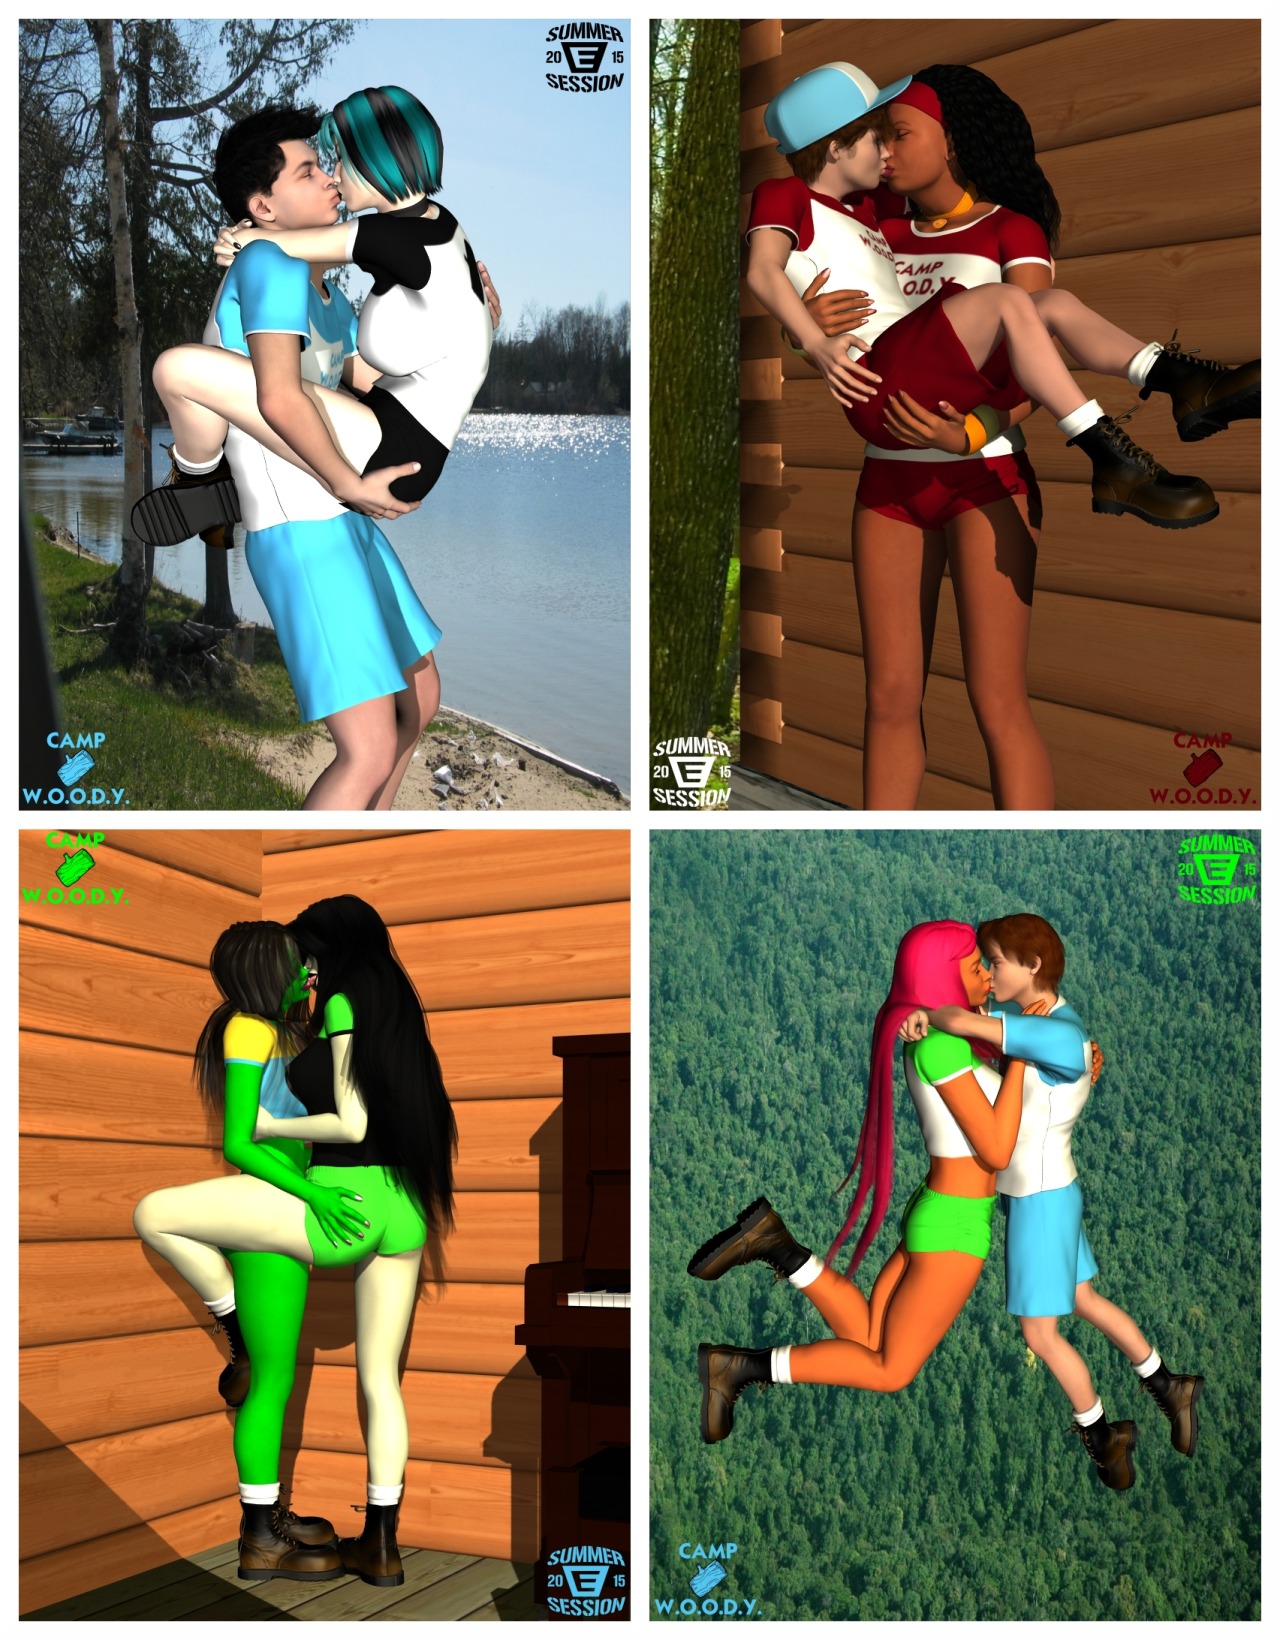 xxmercurial-darknessxx:  Camp W.O.O.D.Y.: Couples (Crossover) ————————————————–